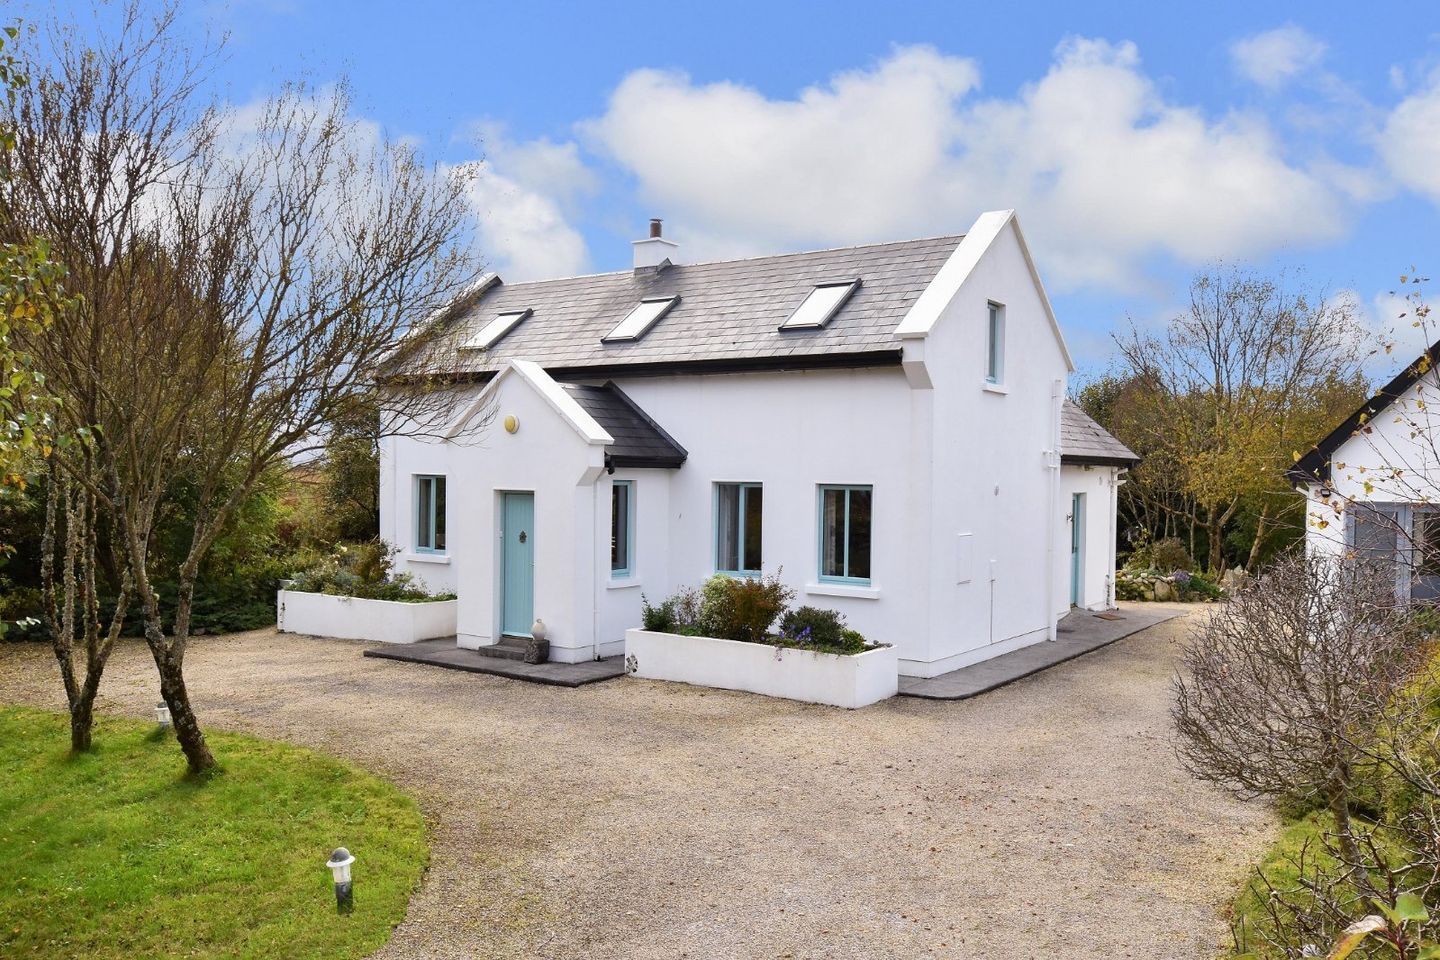 Arcadia, Kilroe East Inverin, Inverin, Co. Galway, H91A4NH